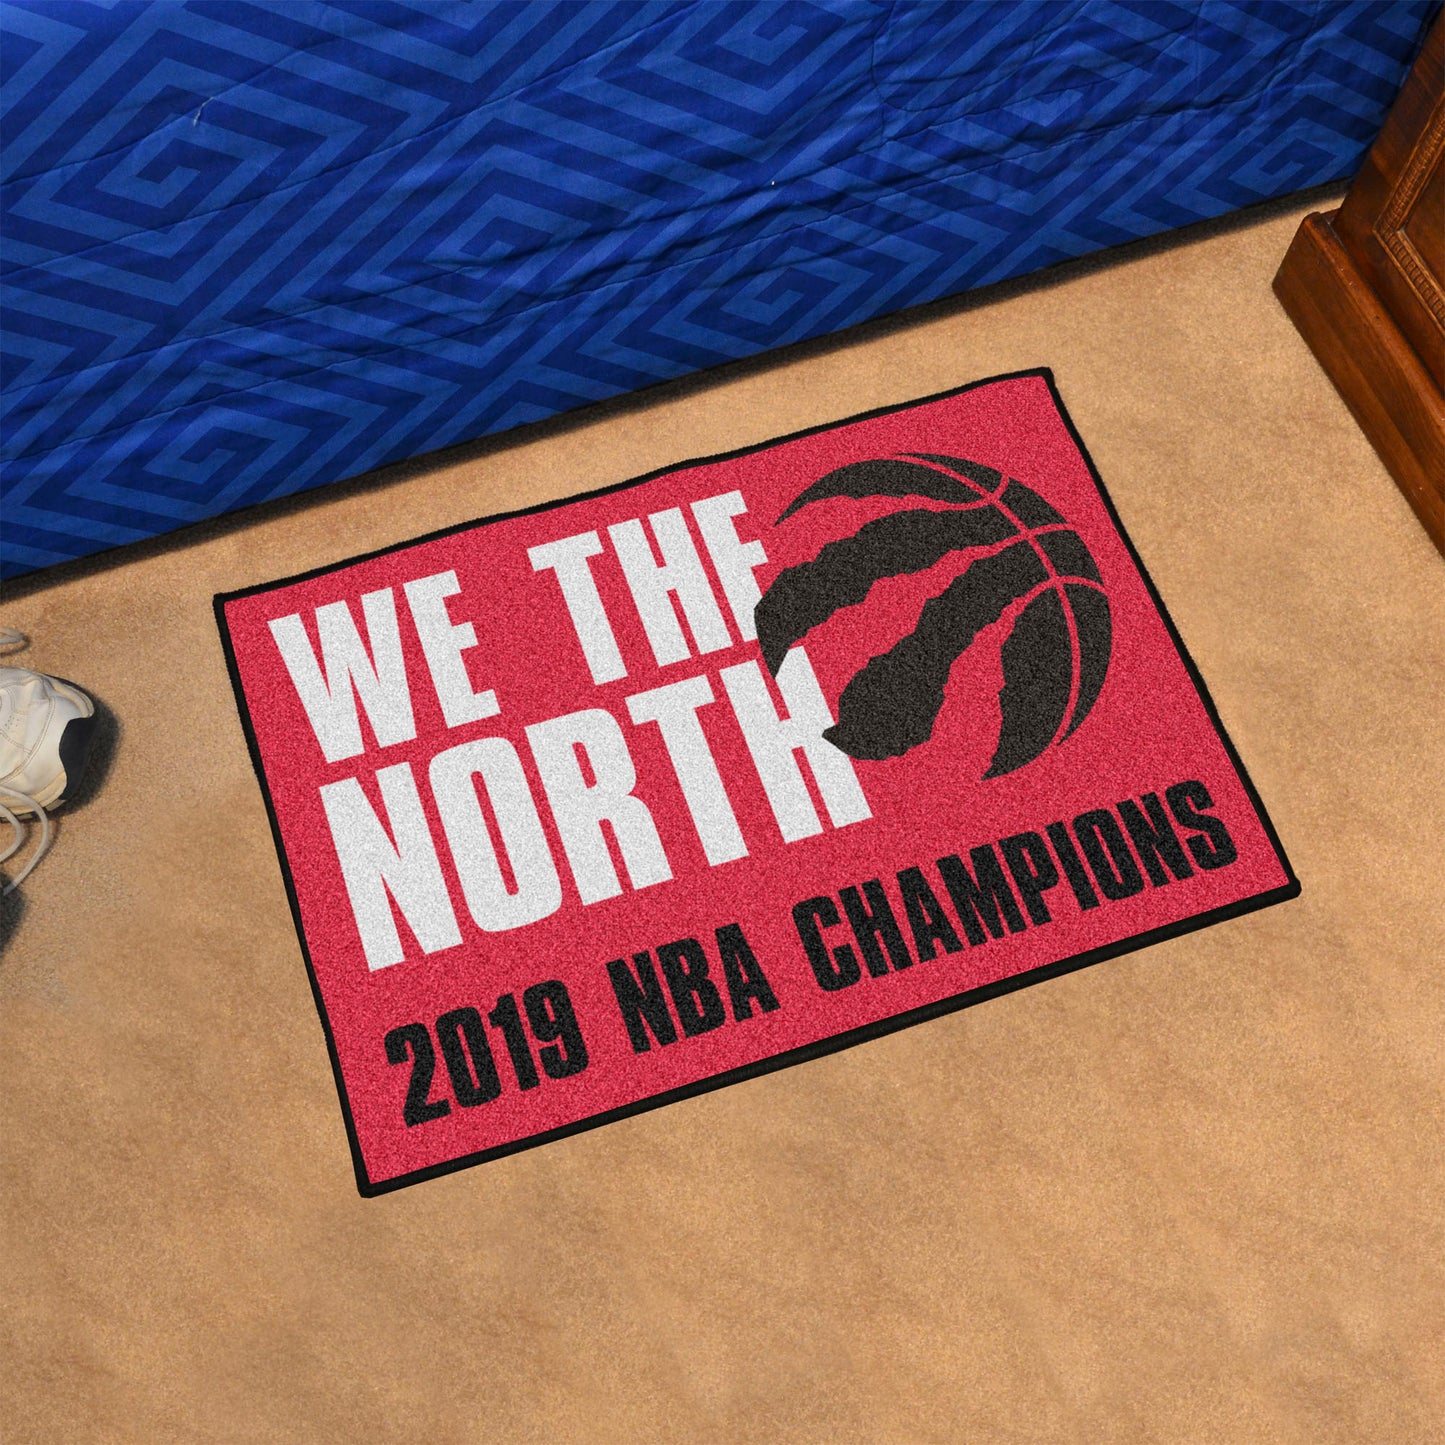 Toronto Raptors 2019 NBA Champions Dynasty Starter Mat Accent Rug - 19in. x 30in.